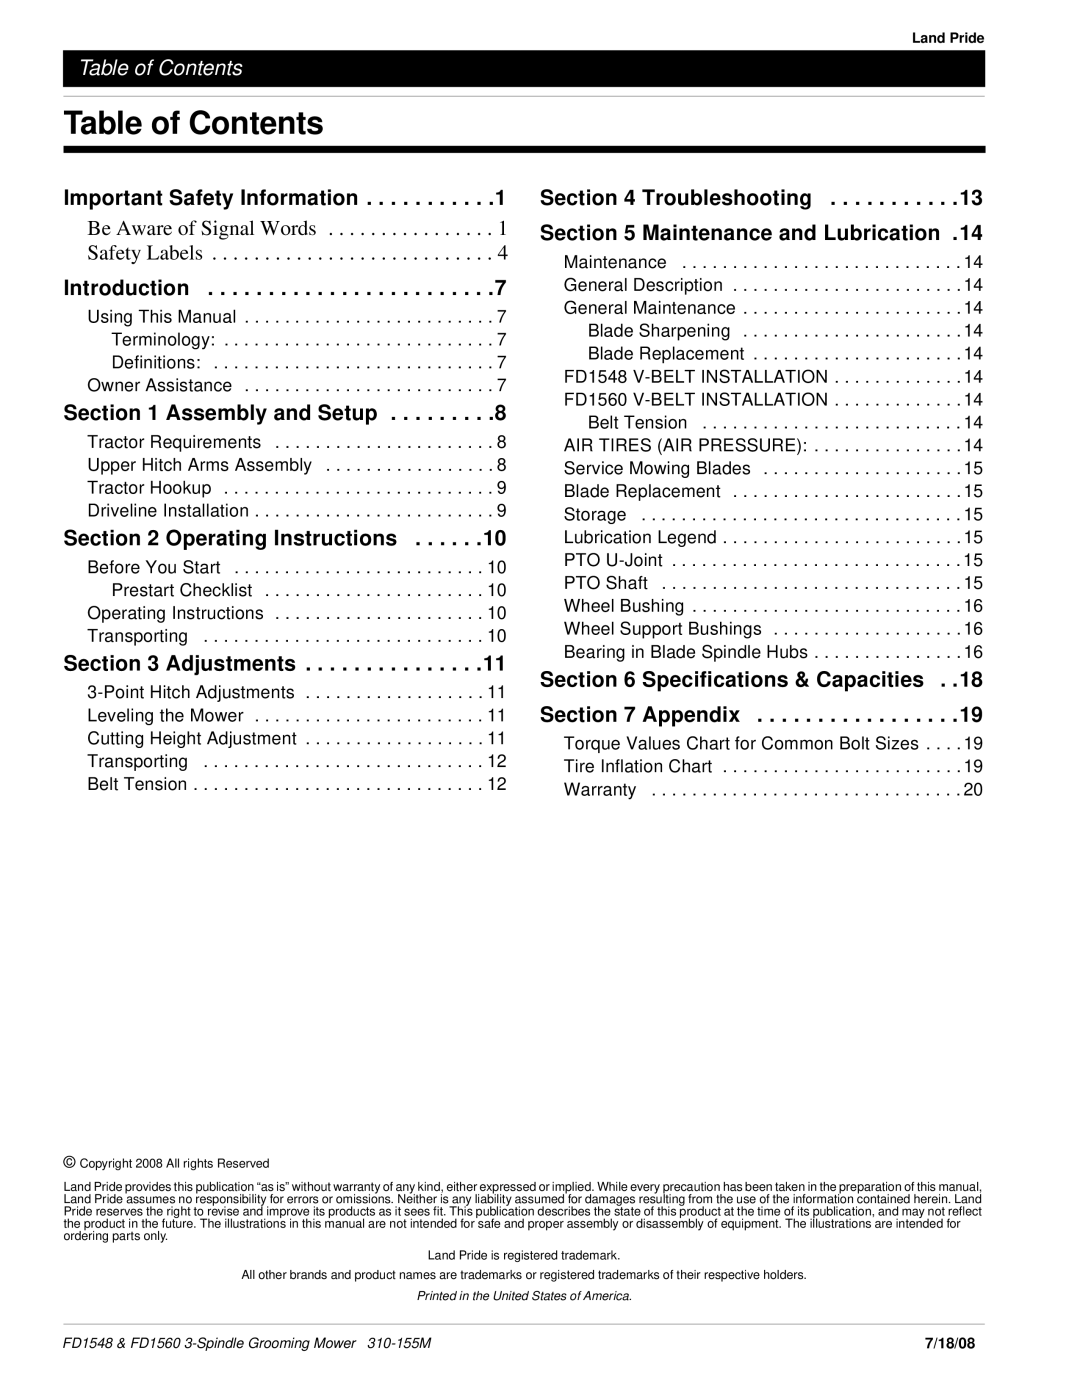 Land Pride fd1548 manual Table of Contents, Important Safety Information, Introduction, Assembly and Setup, Adjustments 